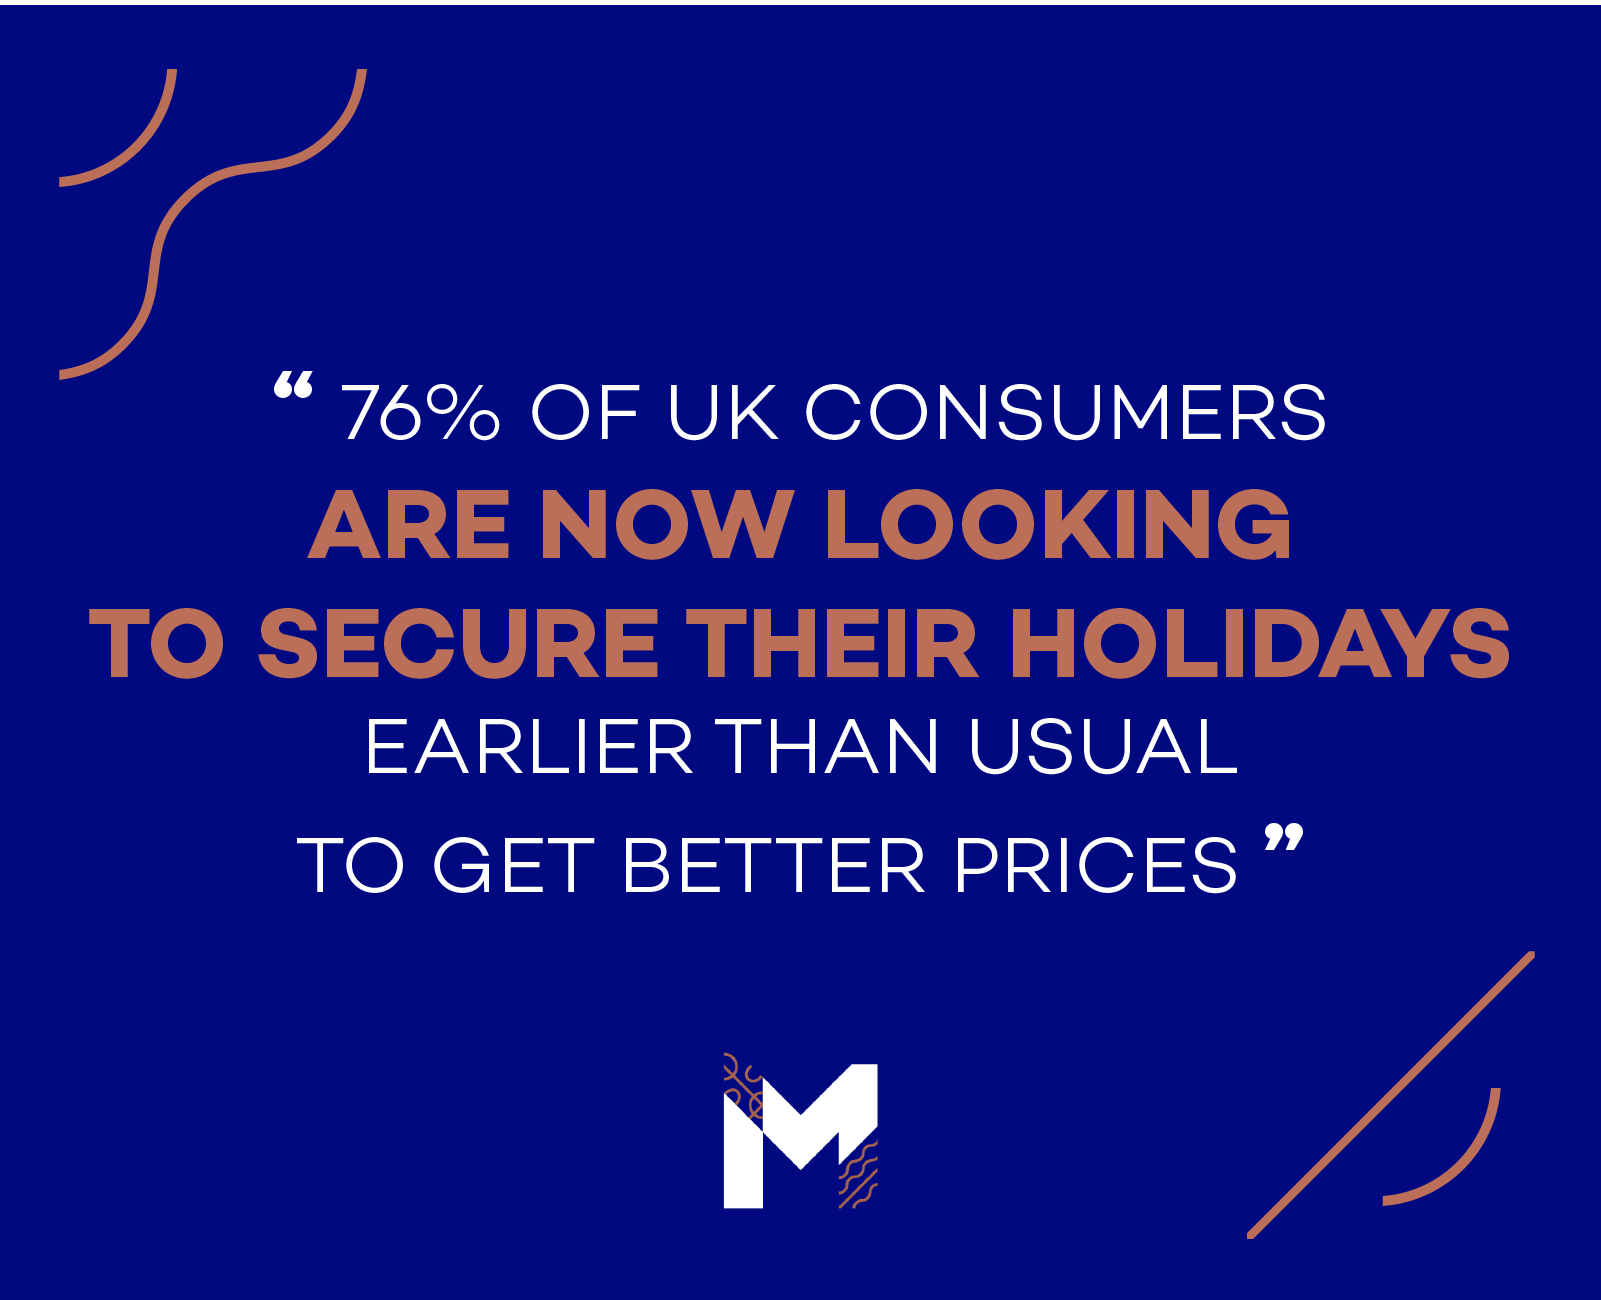 76% of UK consumers are now looking to secure their holidays earlier than usual to get better prices